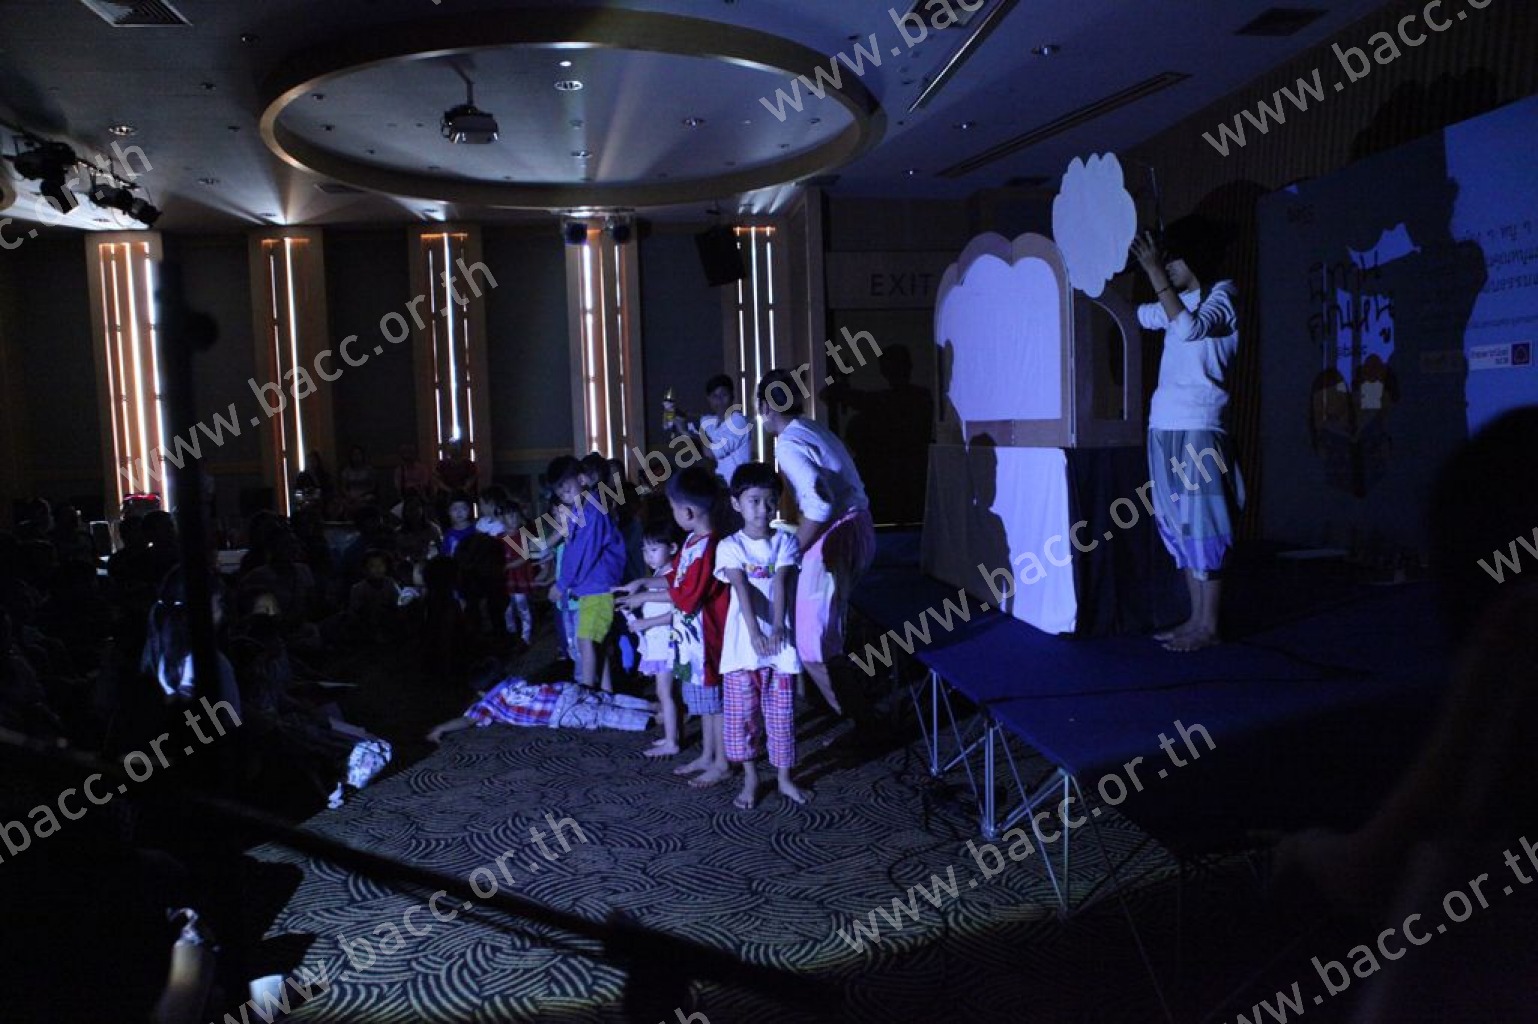 Storytelling Activity for Kids: Shadow puppet performance “Nang Doi Ngearn”